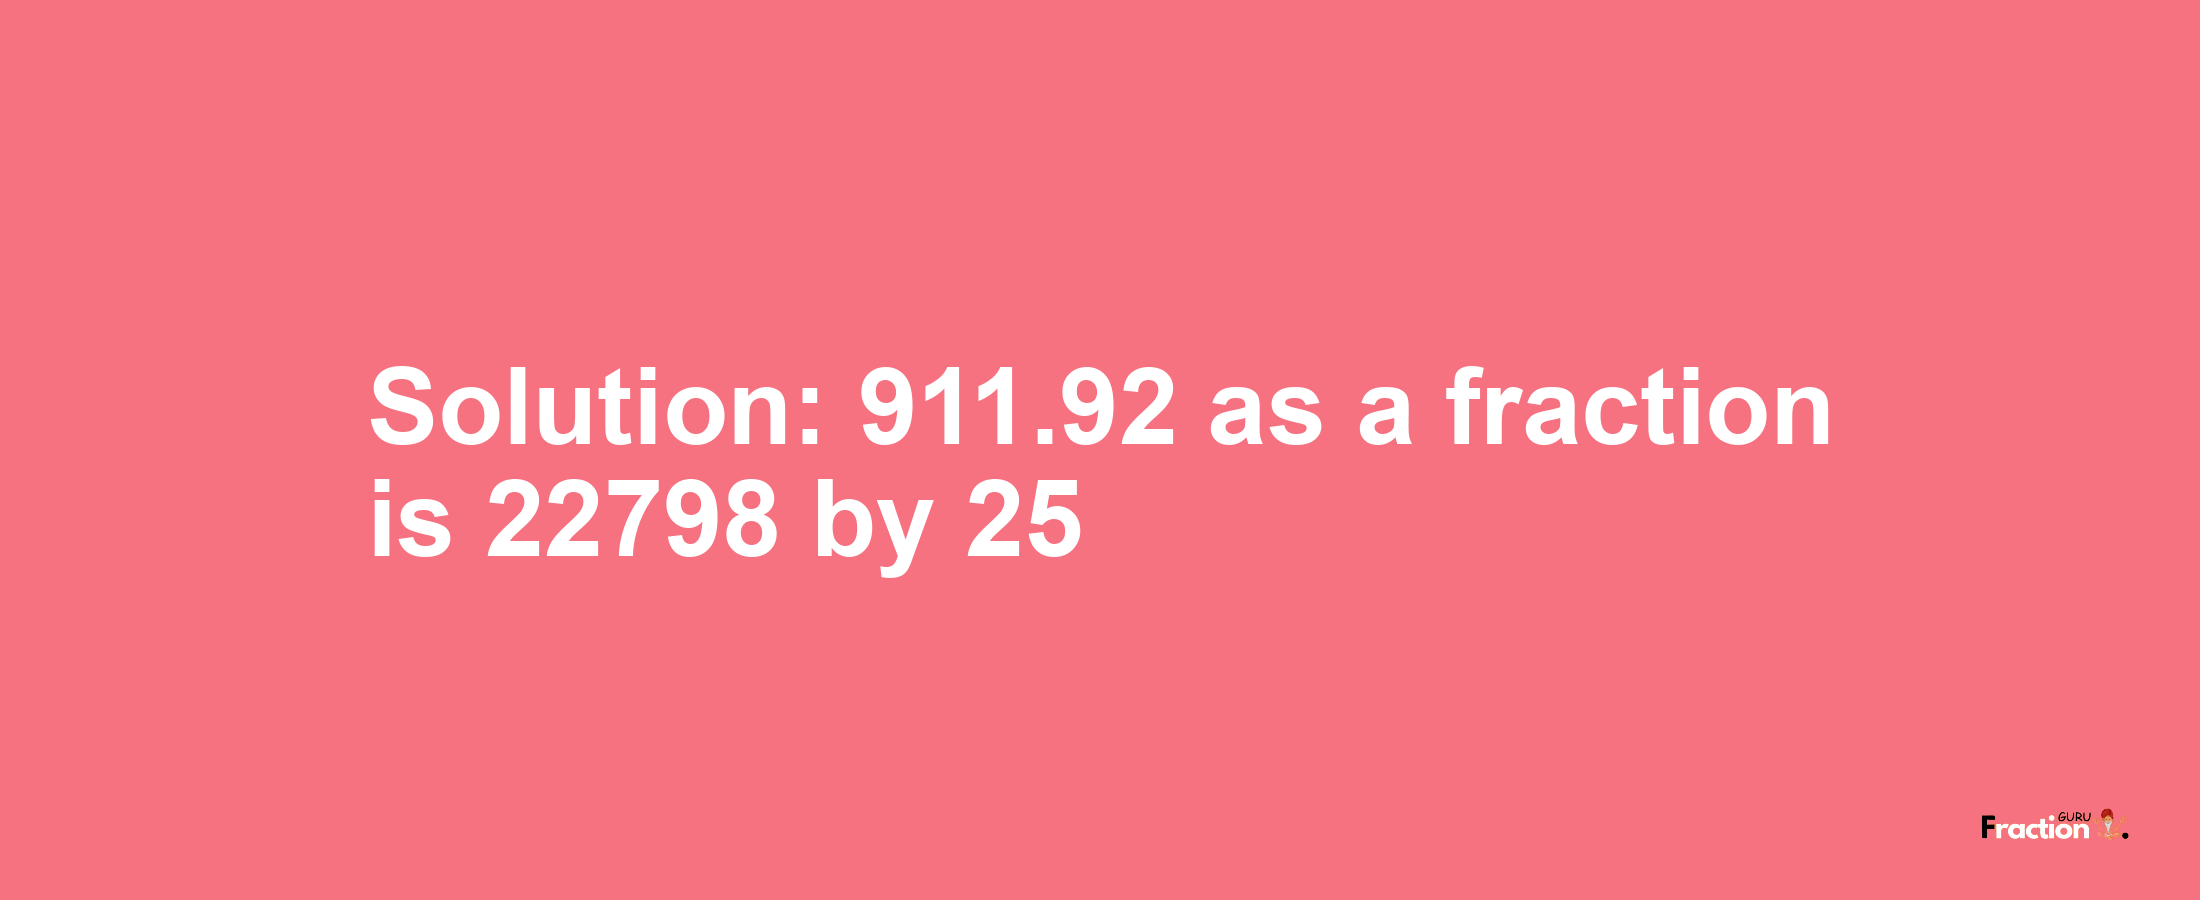 Solution:911.92 as a fraction is 22798/25